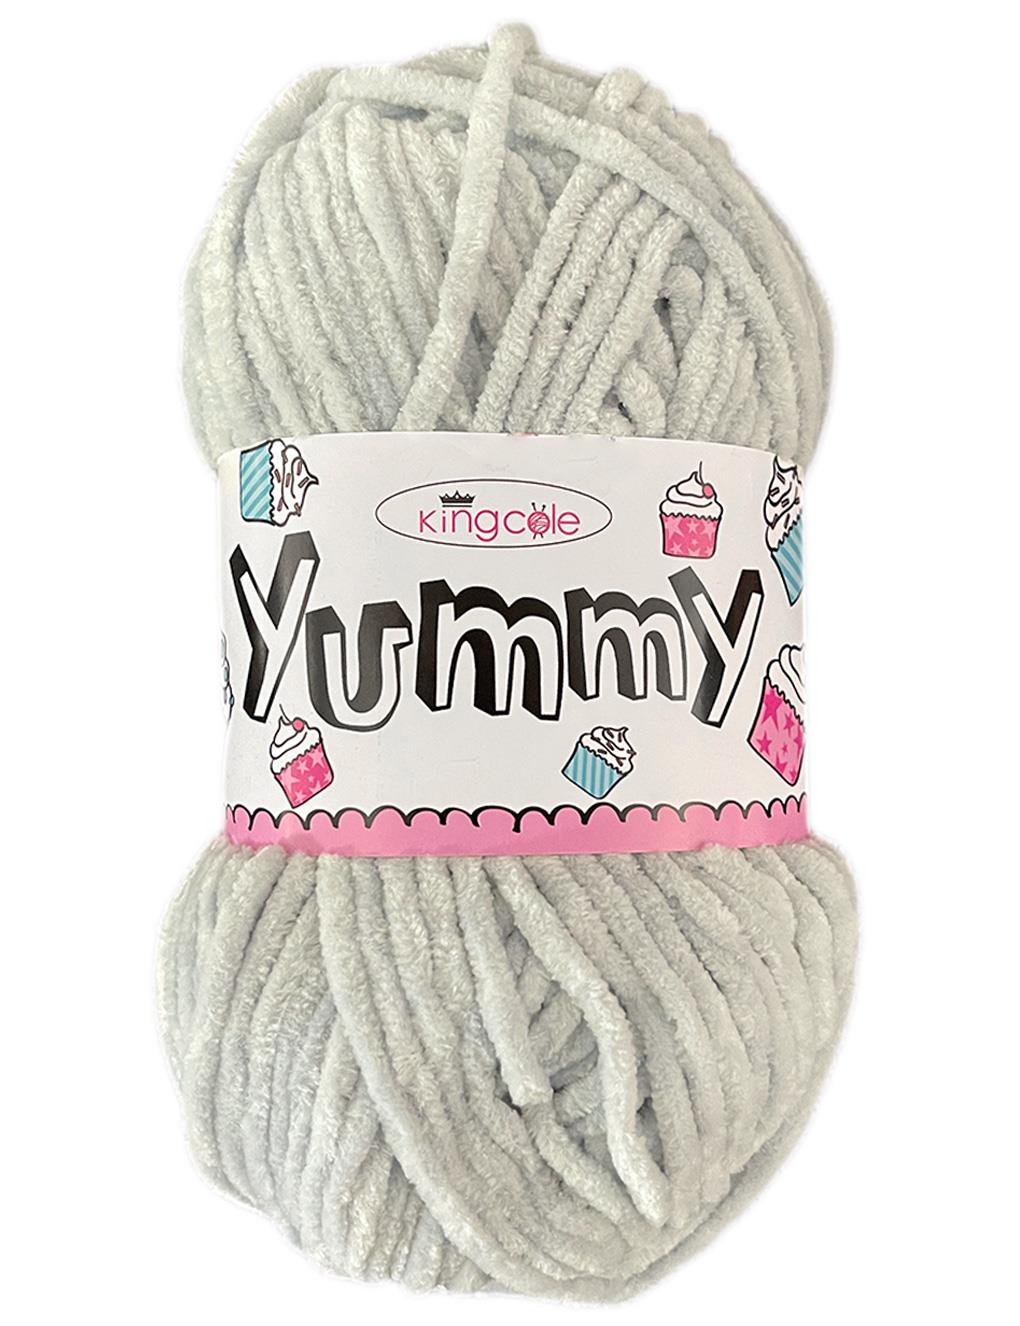 King Cole Yummy Icicle (3479) chenille yarn - 100g